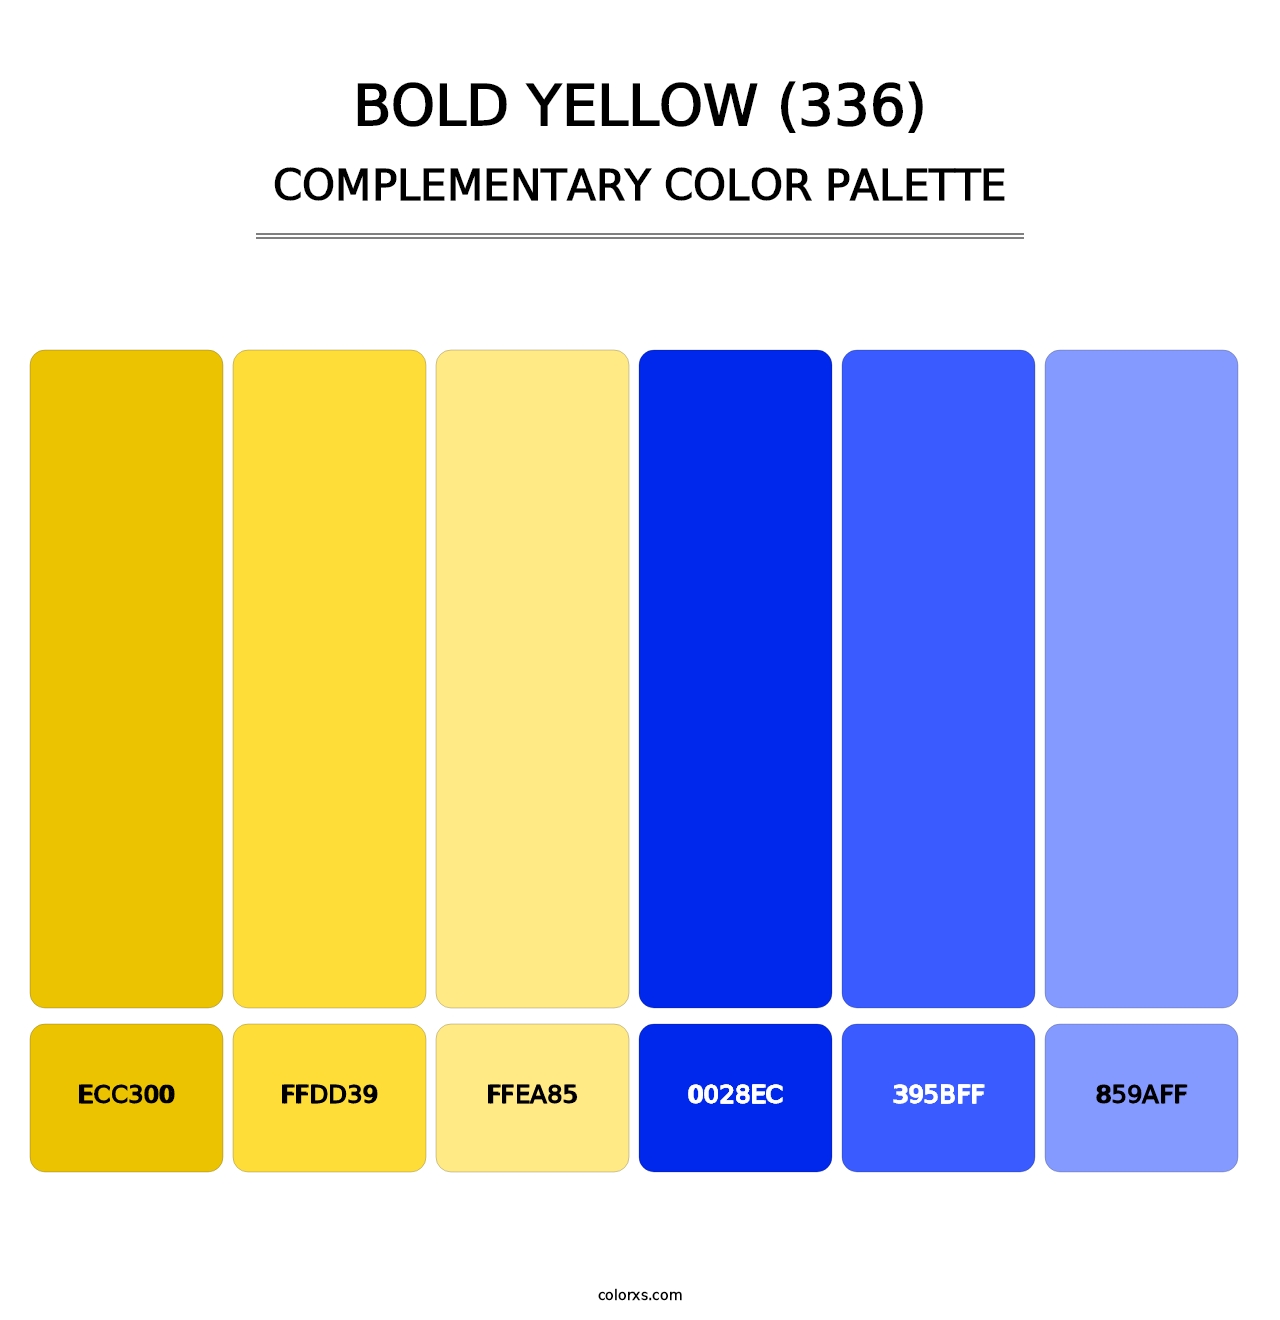 Bold Yellow (336) - Complementary Color Palette